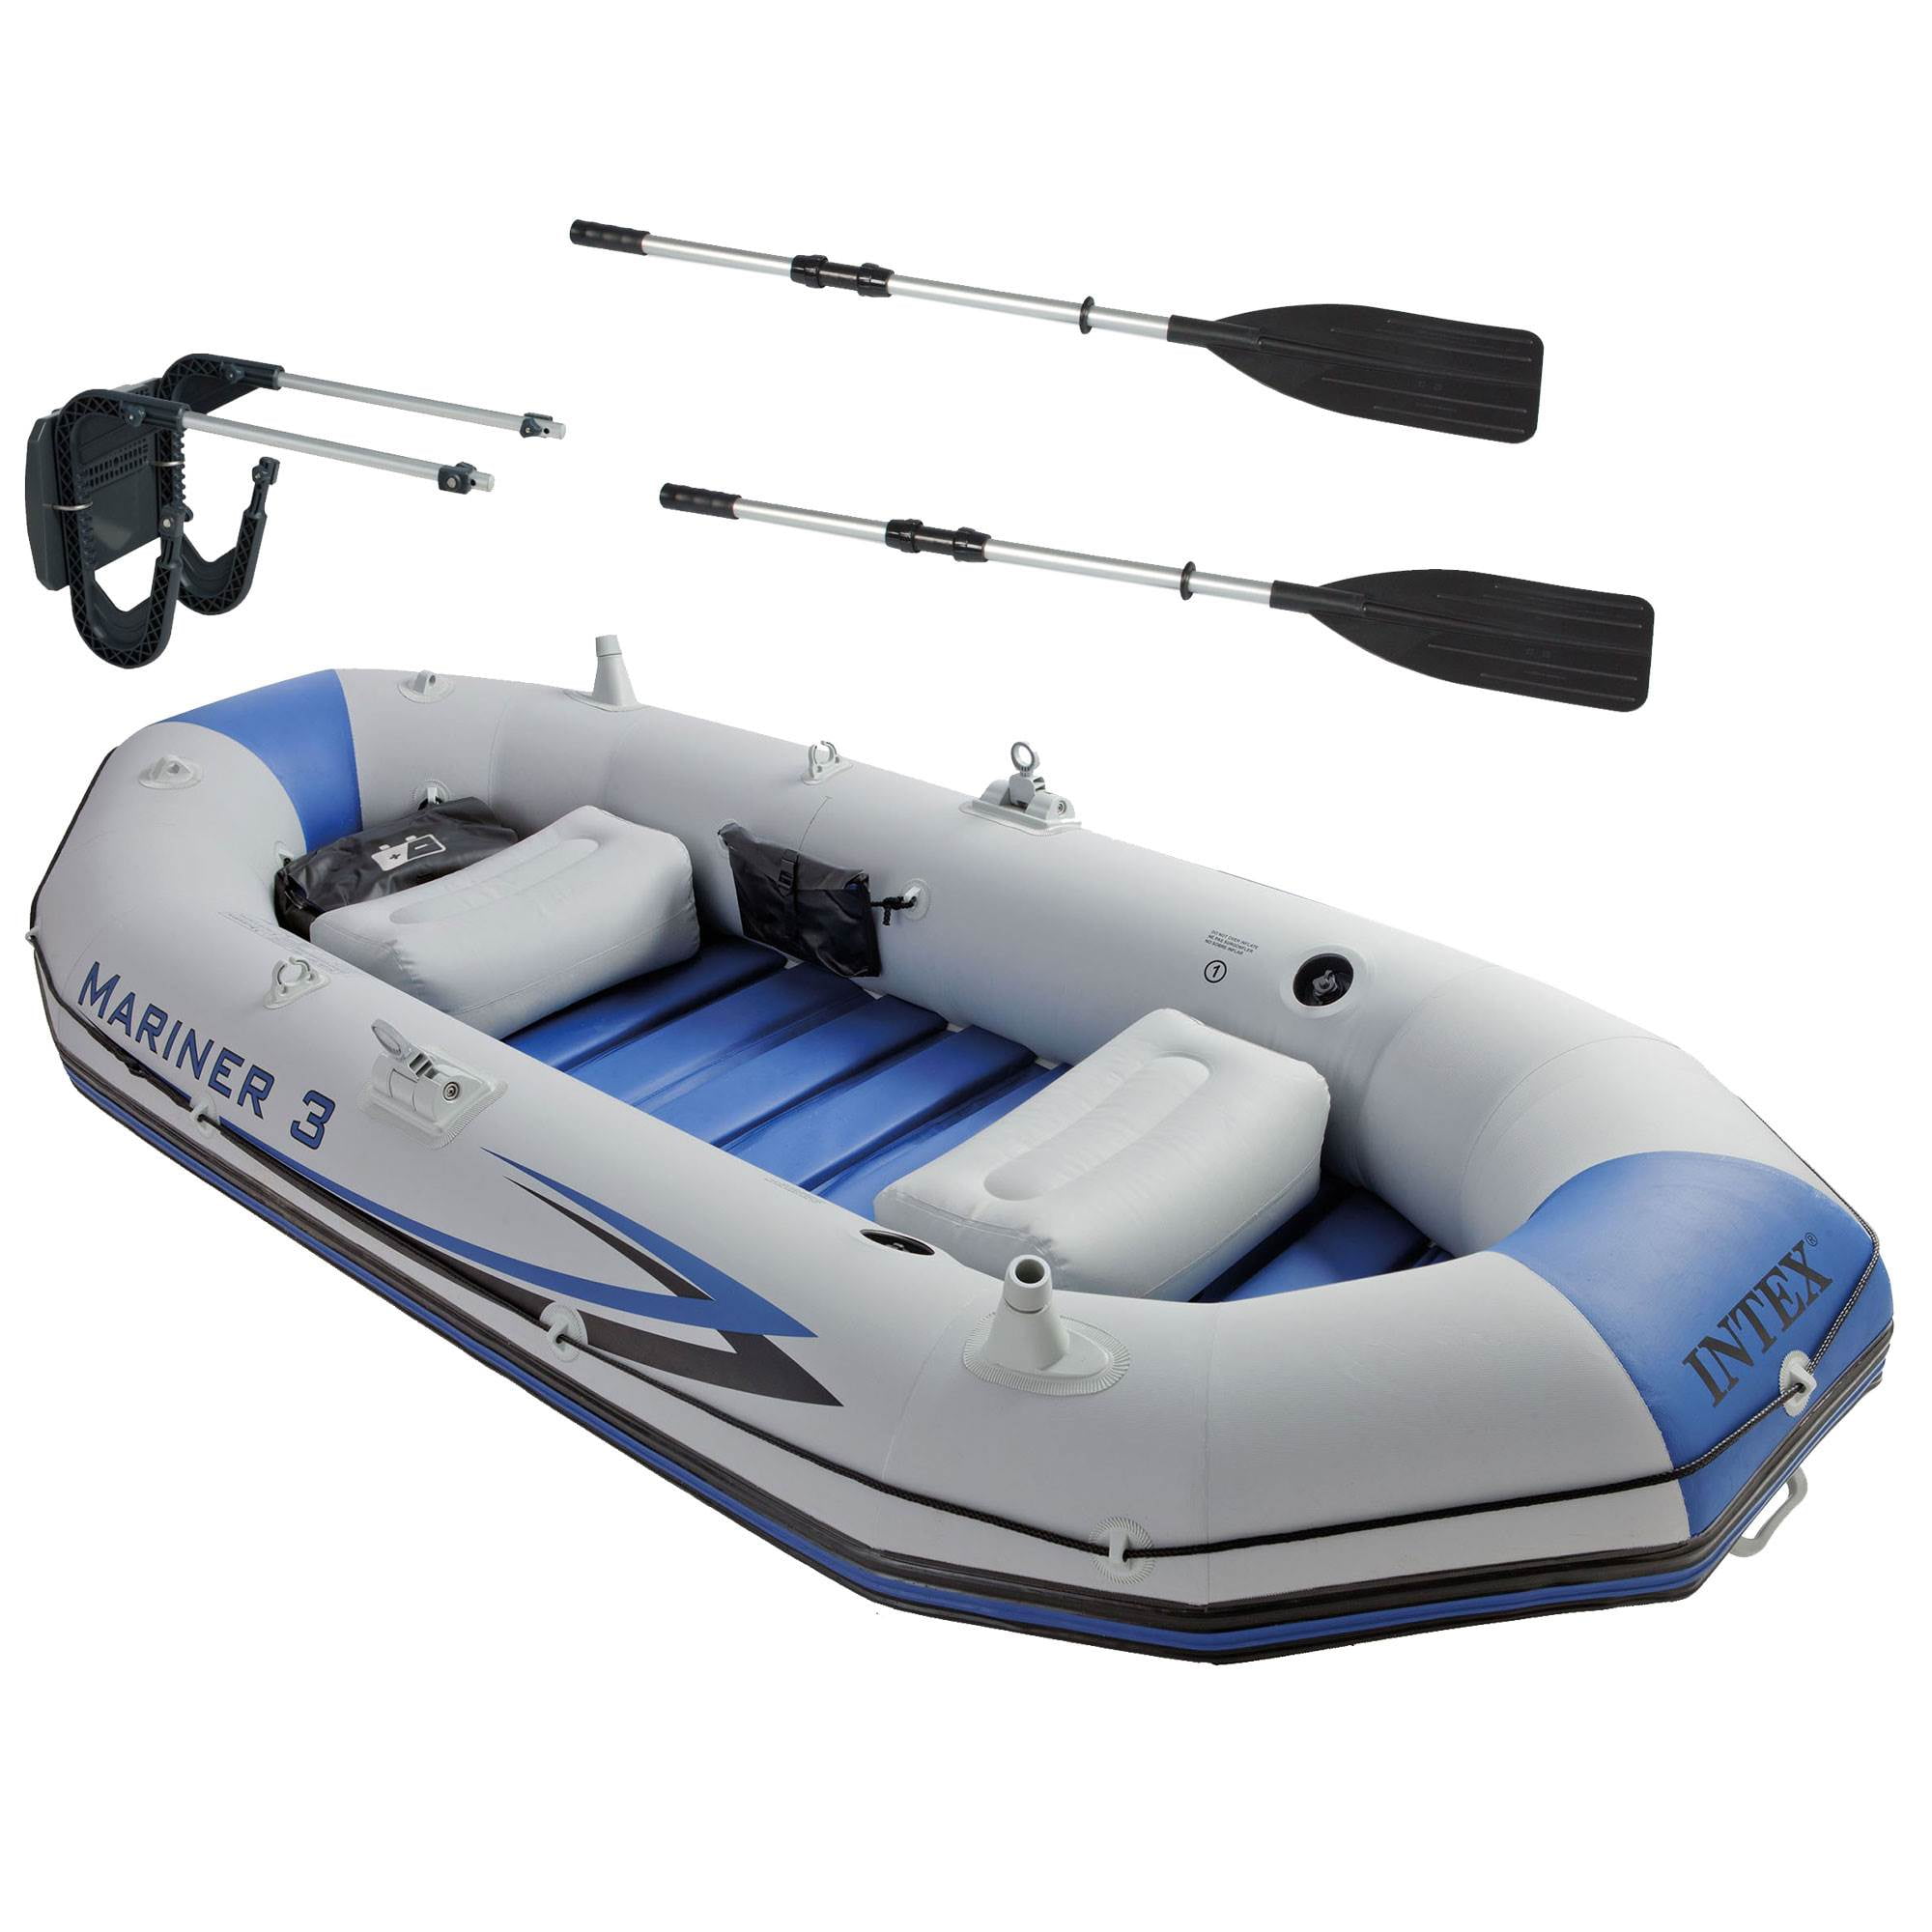 BARK BT-310 TOP QUALITY INFLATABLE DINGHY FISHING BOAT MOTORBOAT 